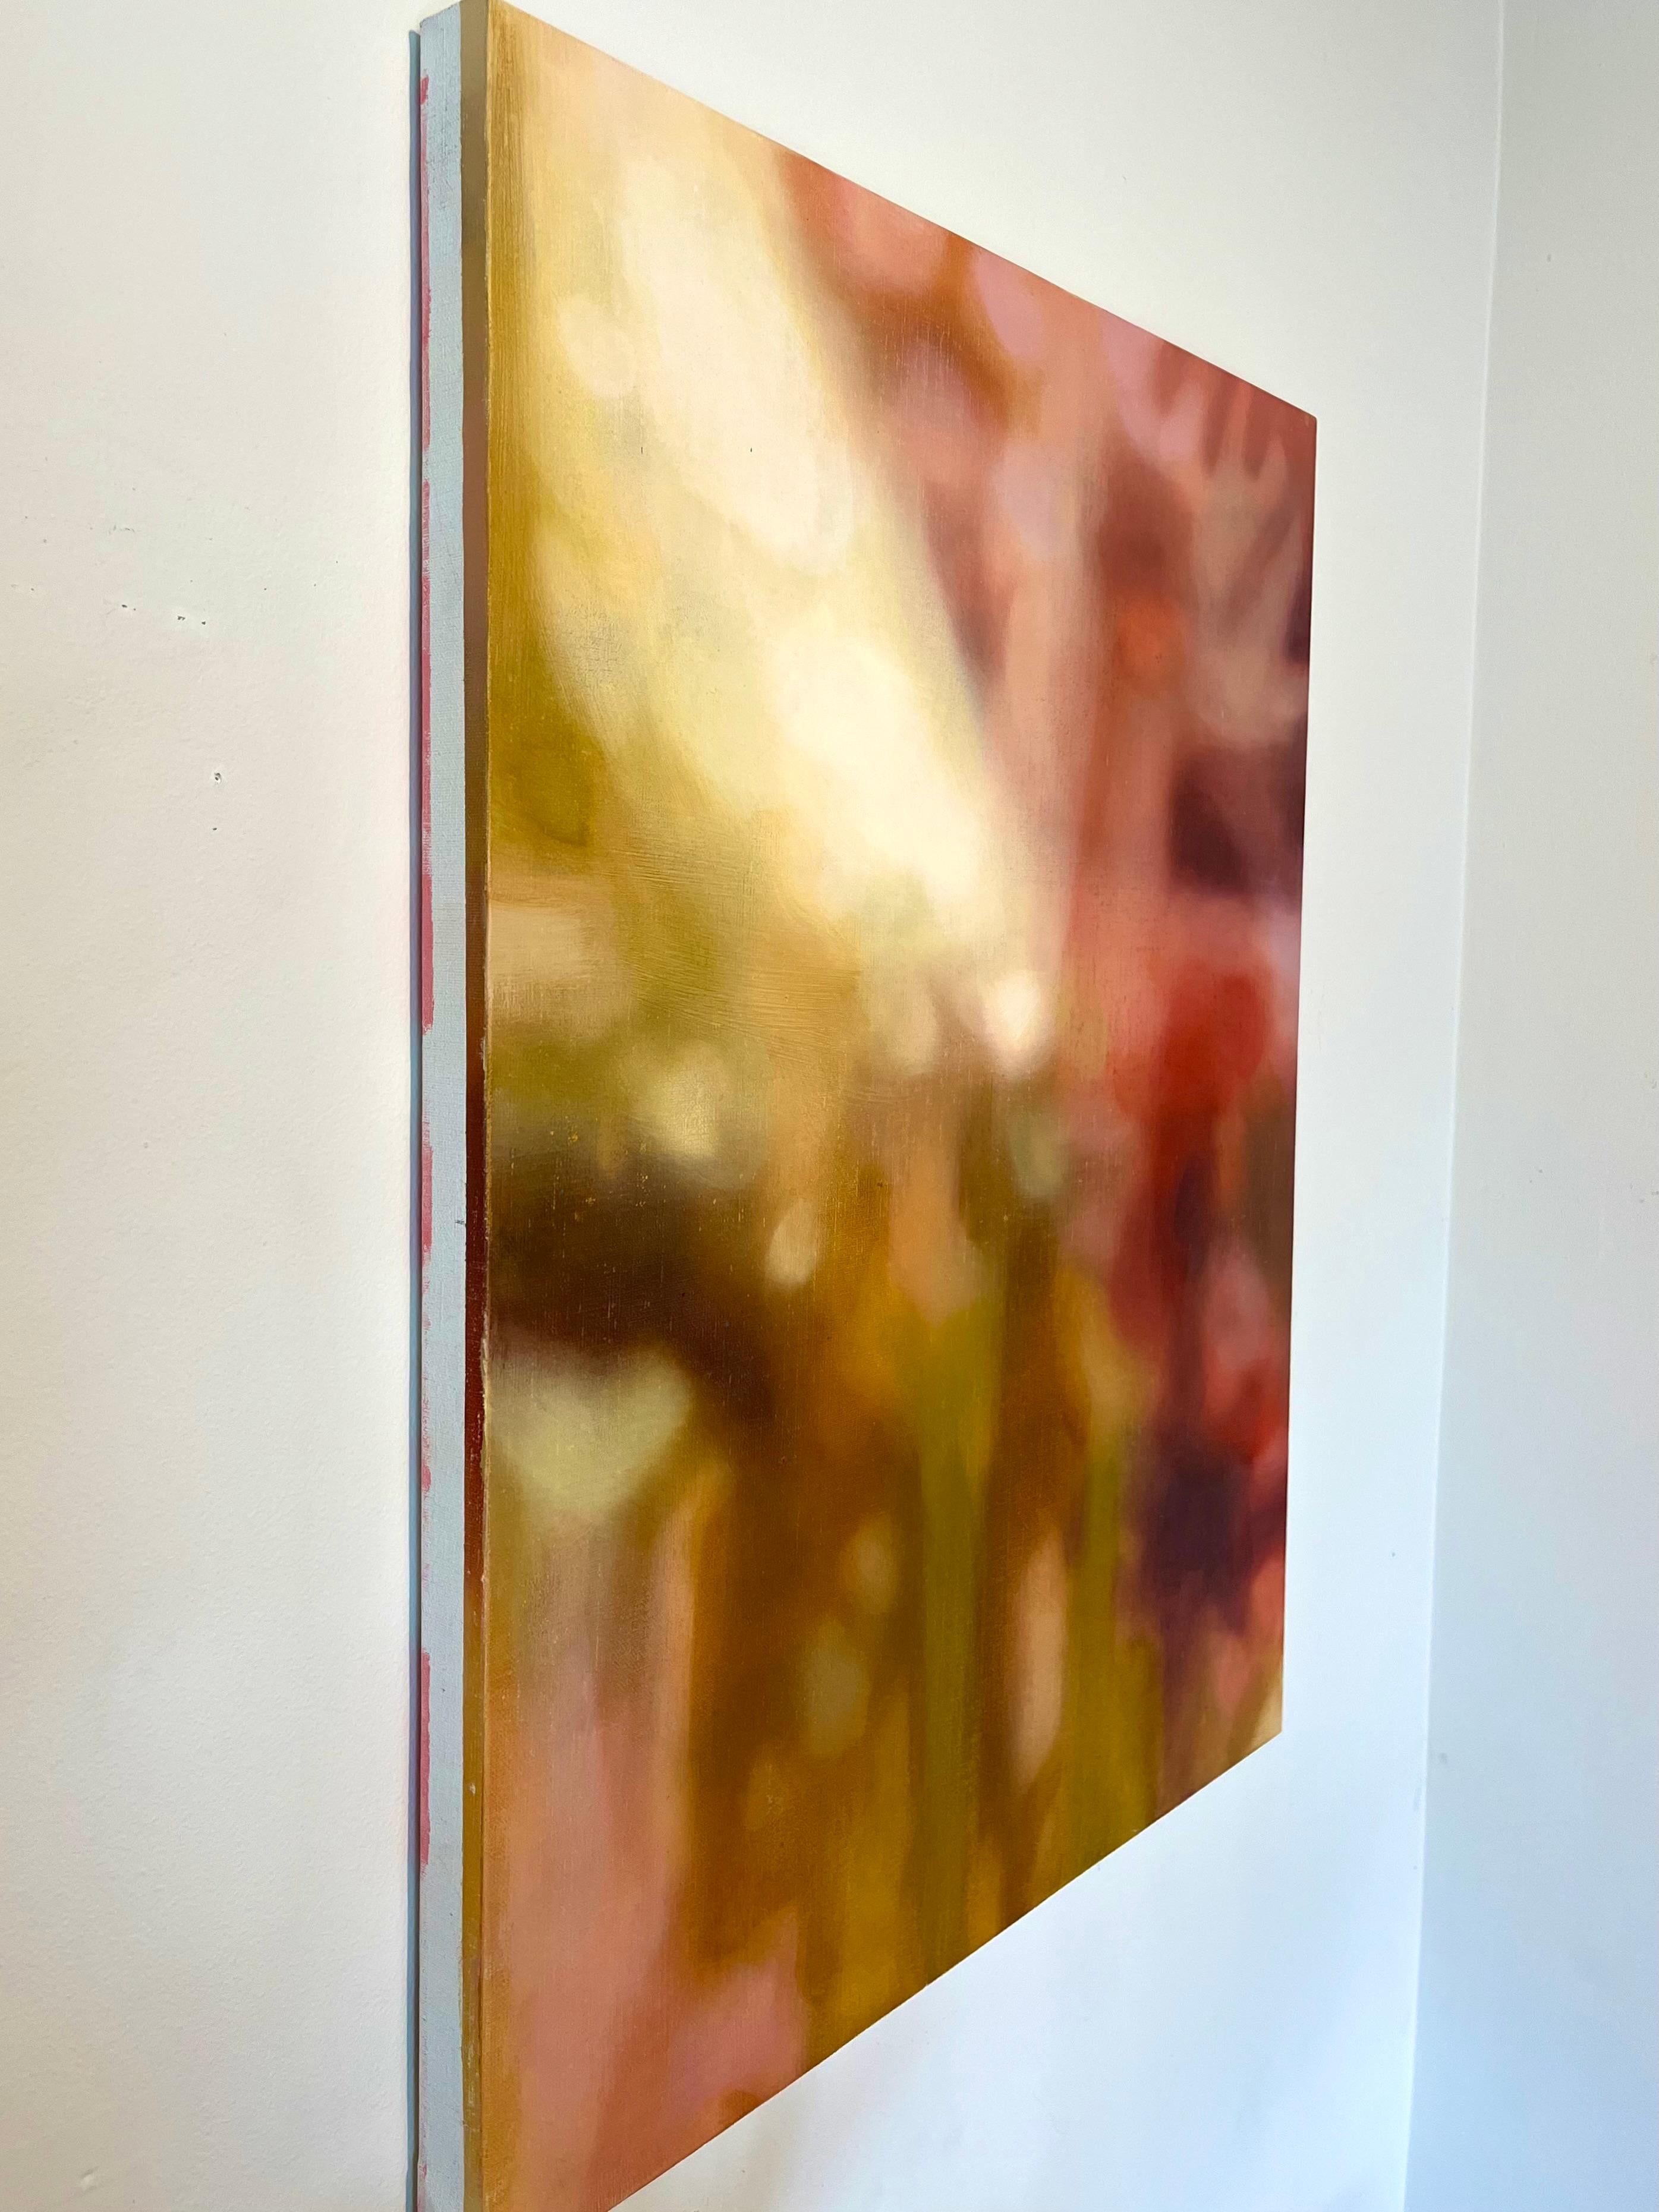 Late Sun
Description: Oil on linen, red, pink, gestural, modern, abstract

This abstract painting tells a story of the light streaming through the window late in the afternoon. It’s glowing use use of color and light create the sense of warmth from